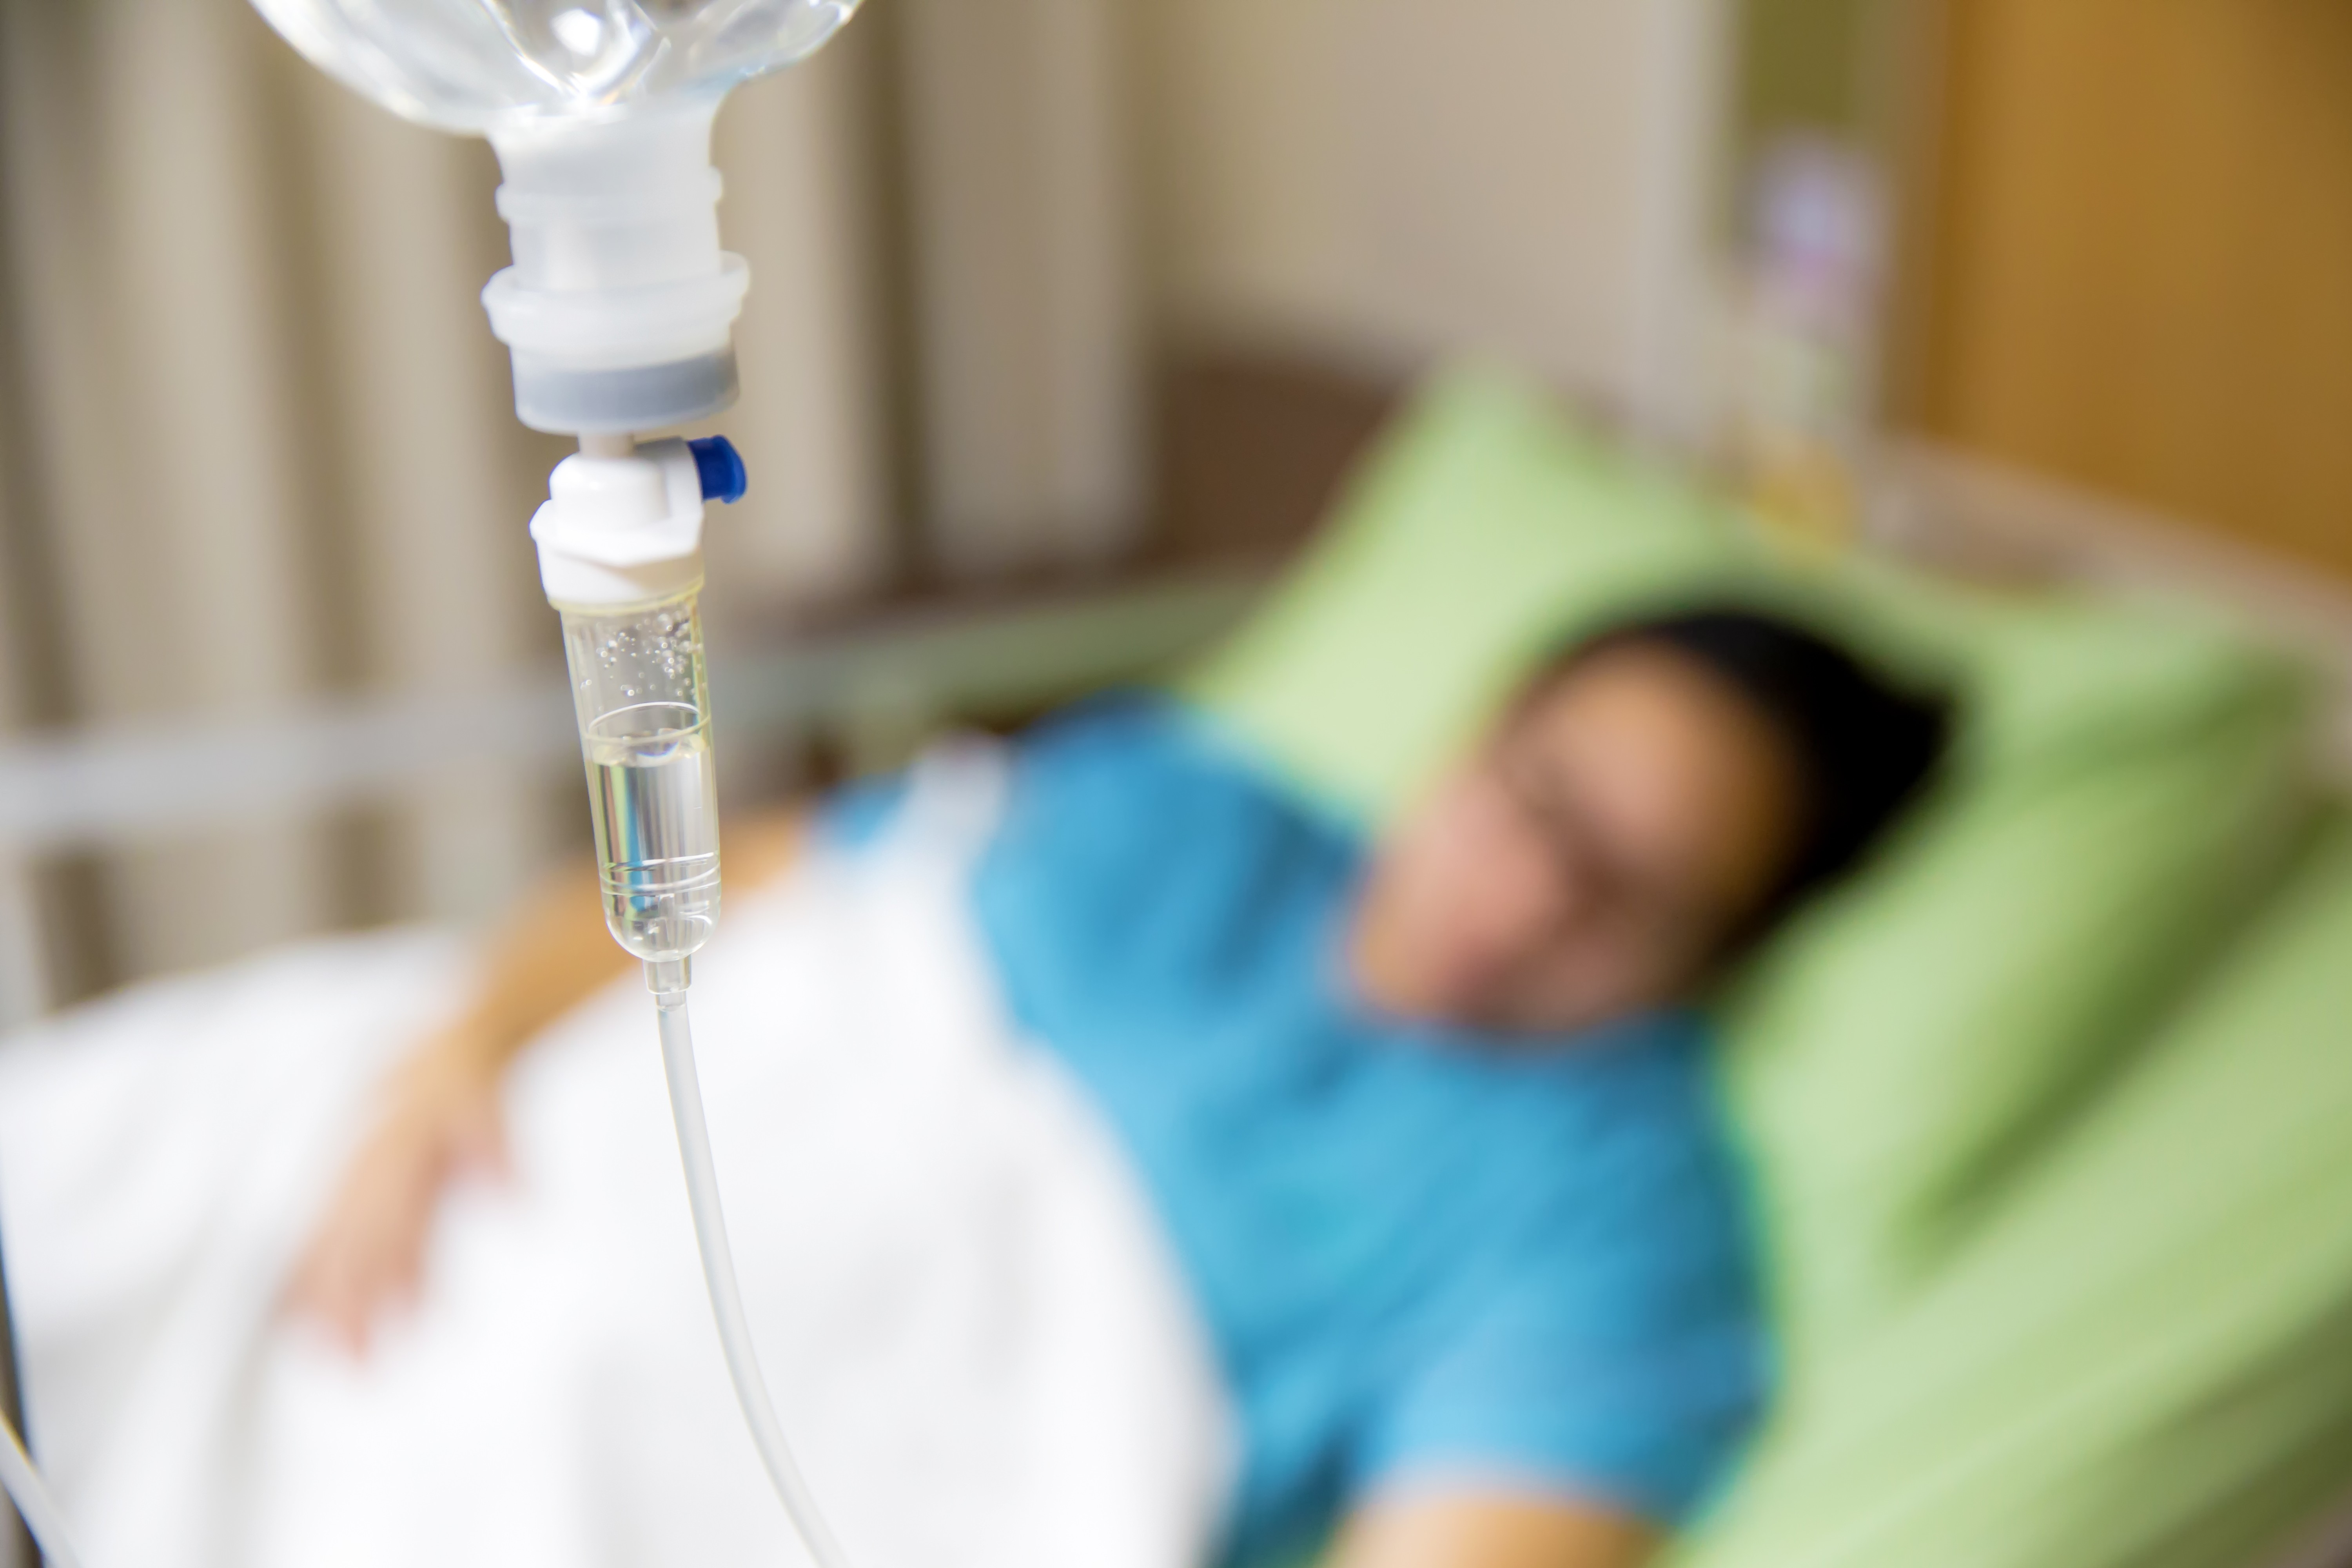 Some staff required kidney treatment after the training, the report stated. Photo: Shutterstock